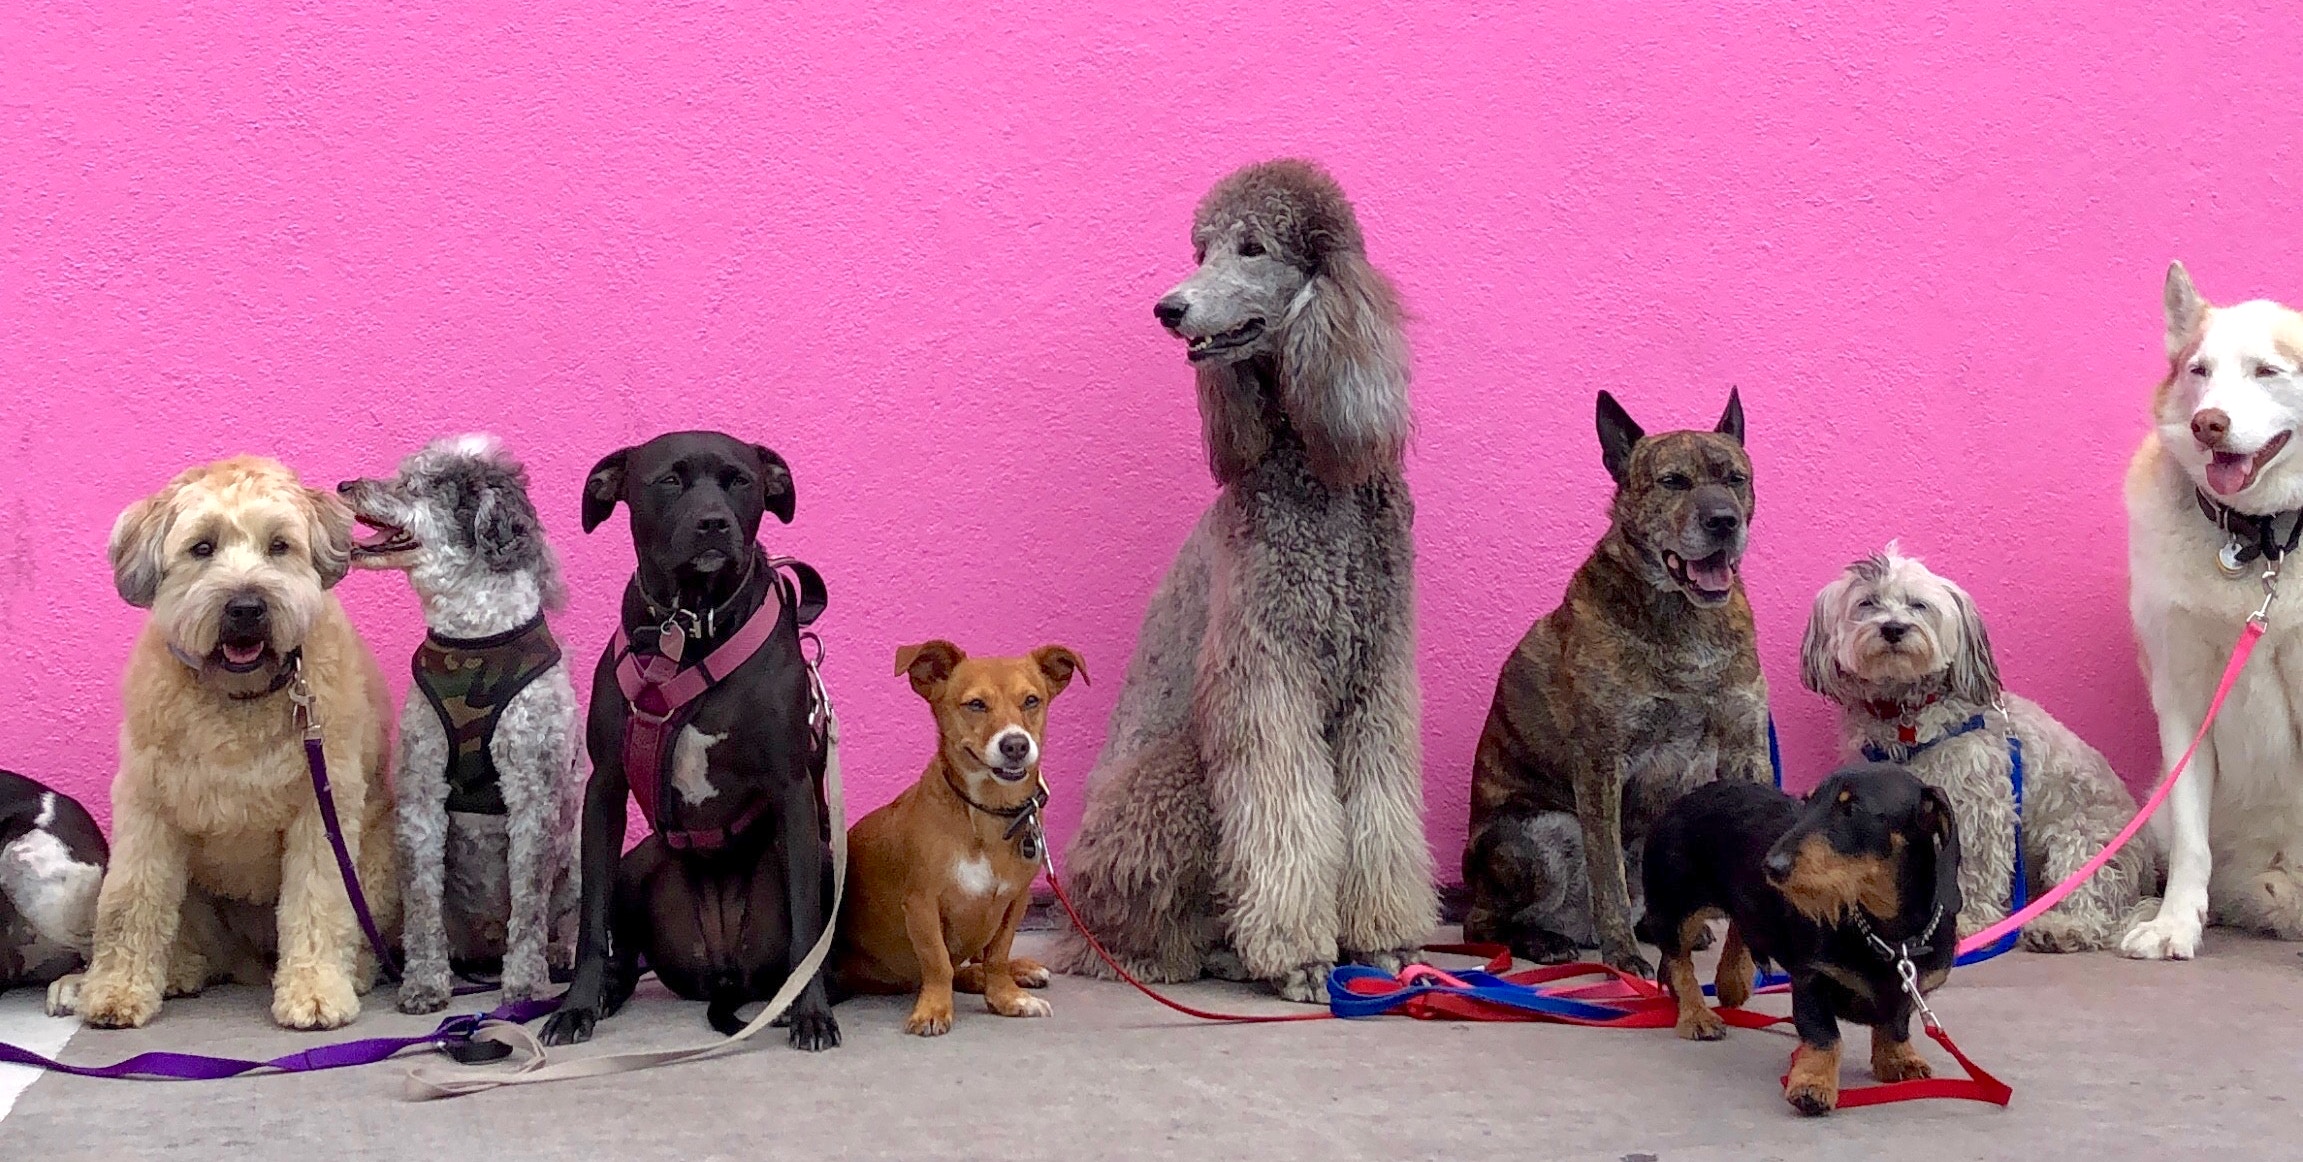 a community of dogs of various dogs (random breeds) in front of bright-pink wall